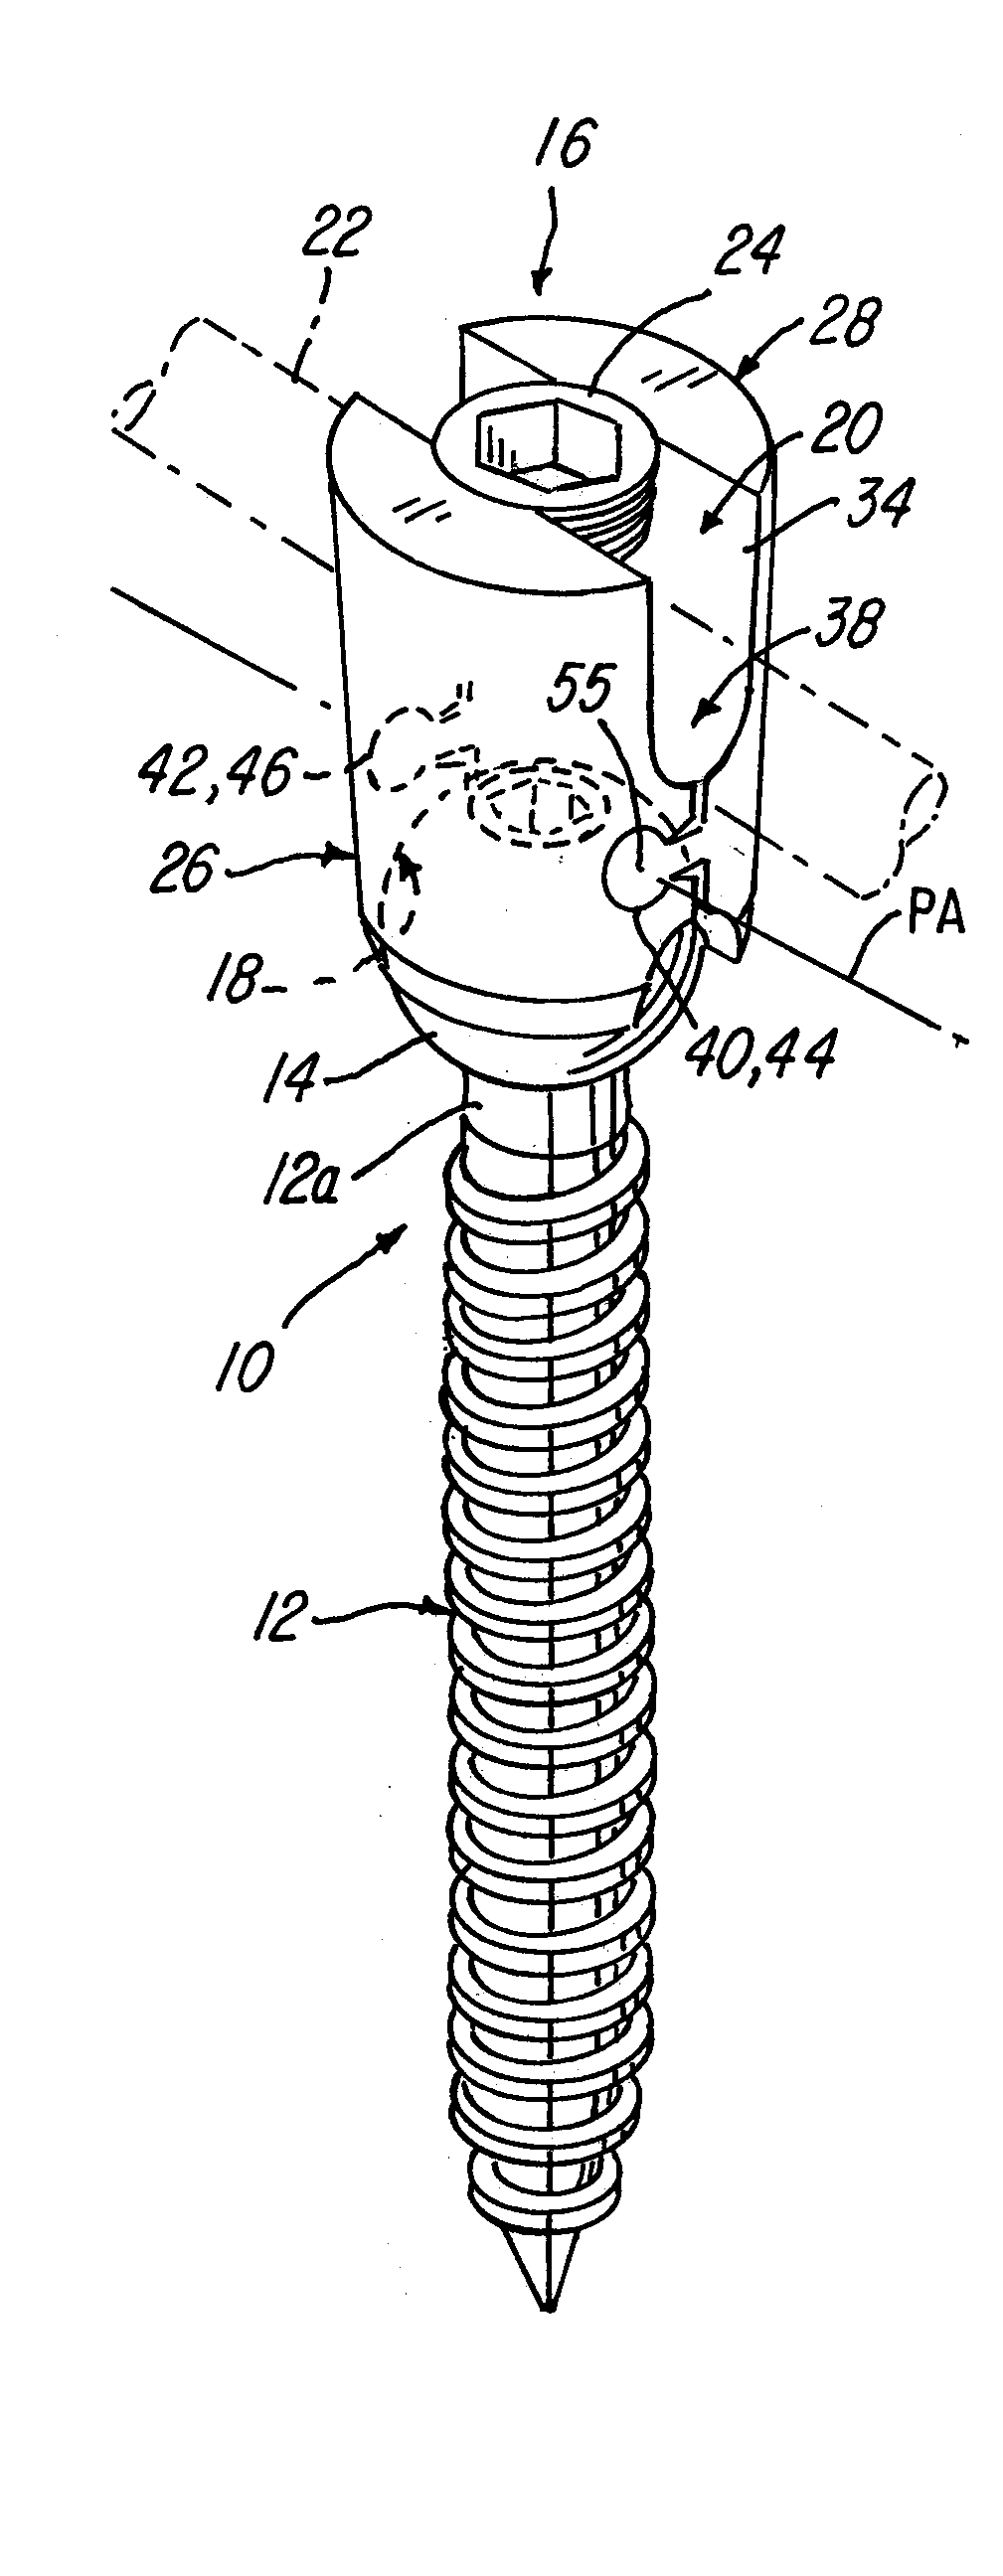 Polyaxial screw system and method having a hinged receiver